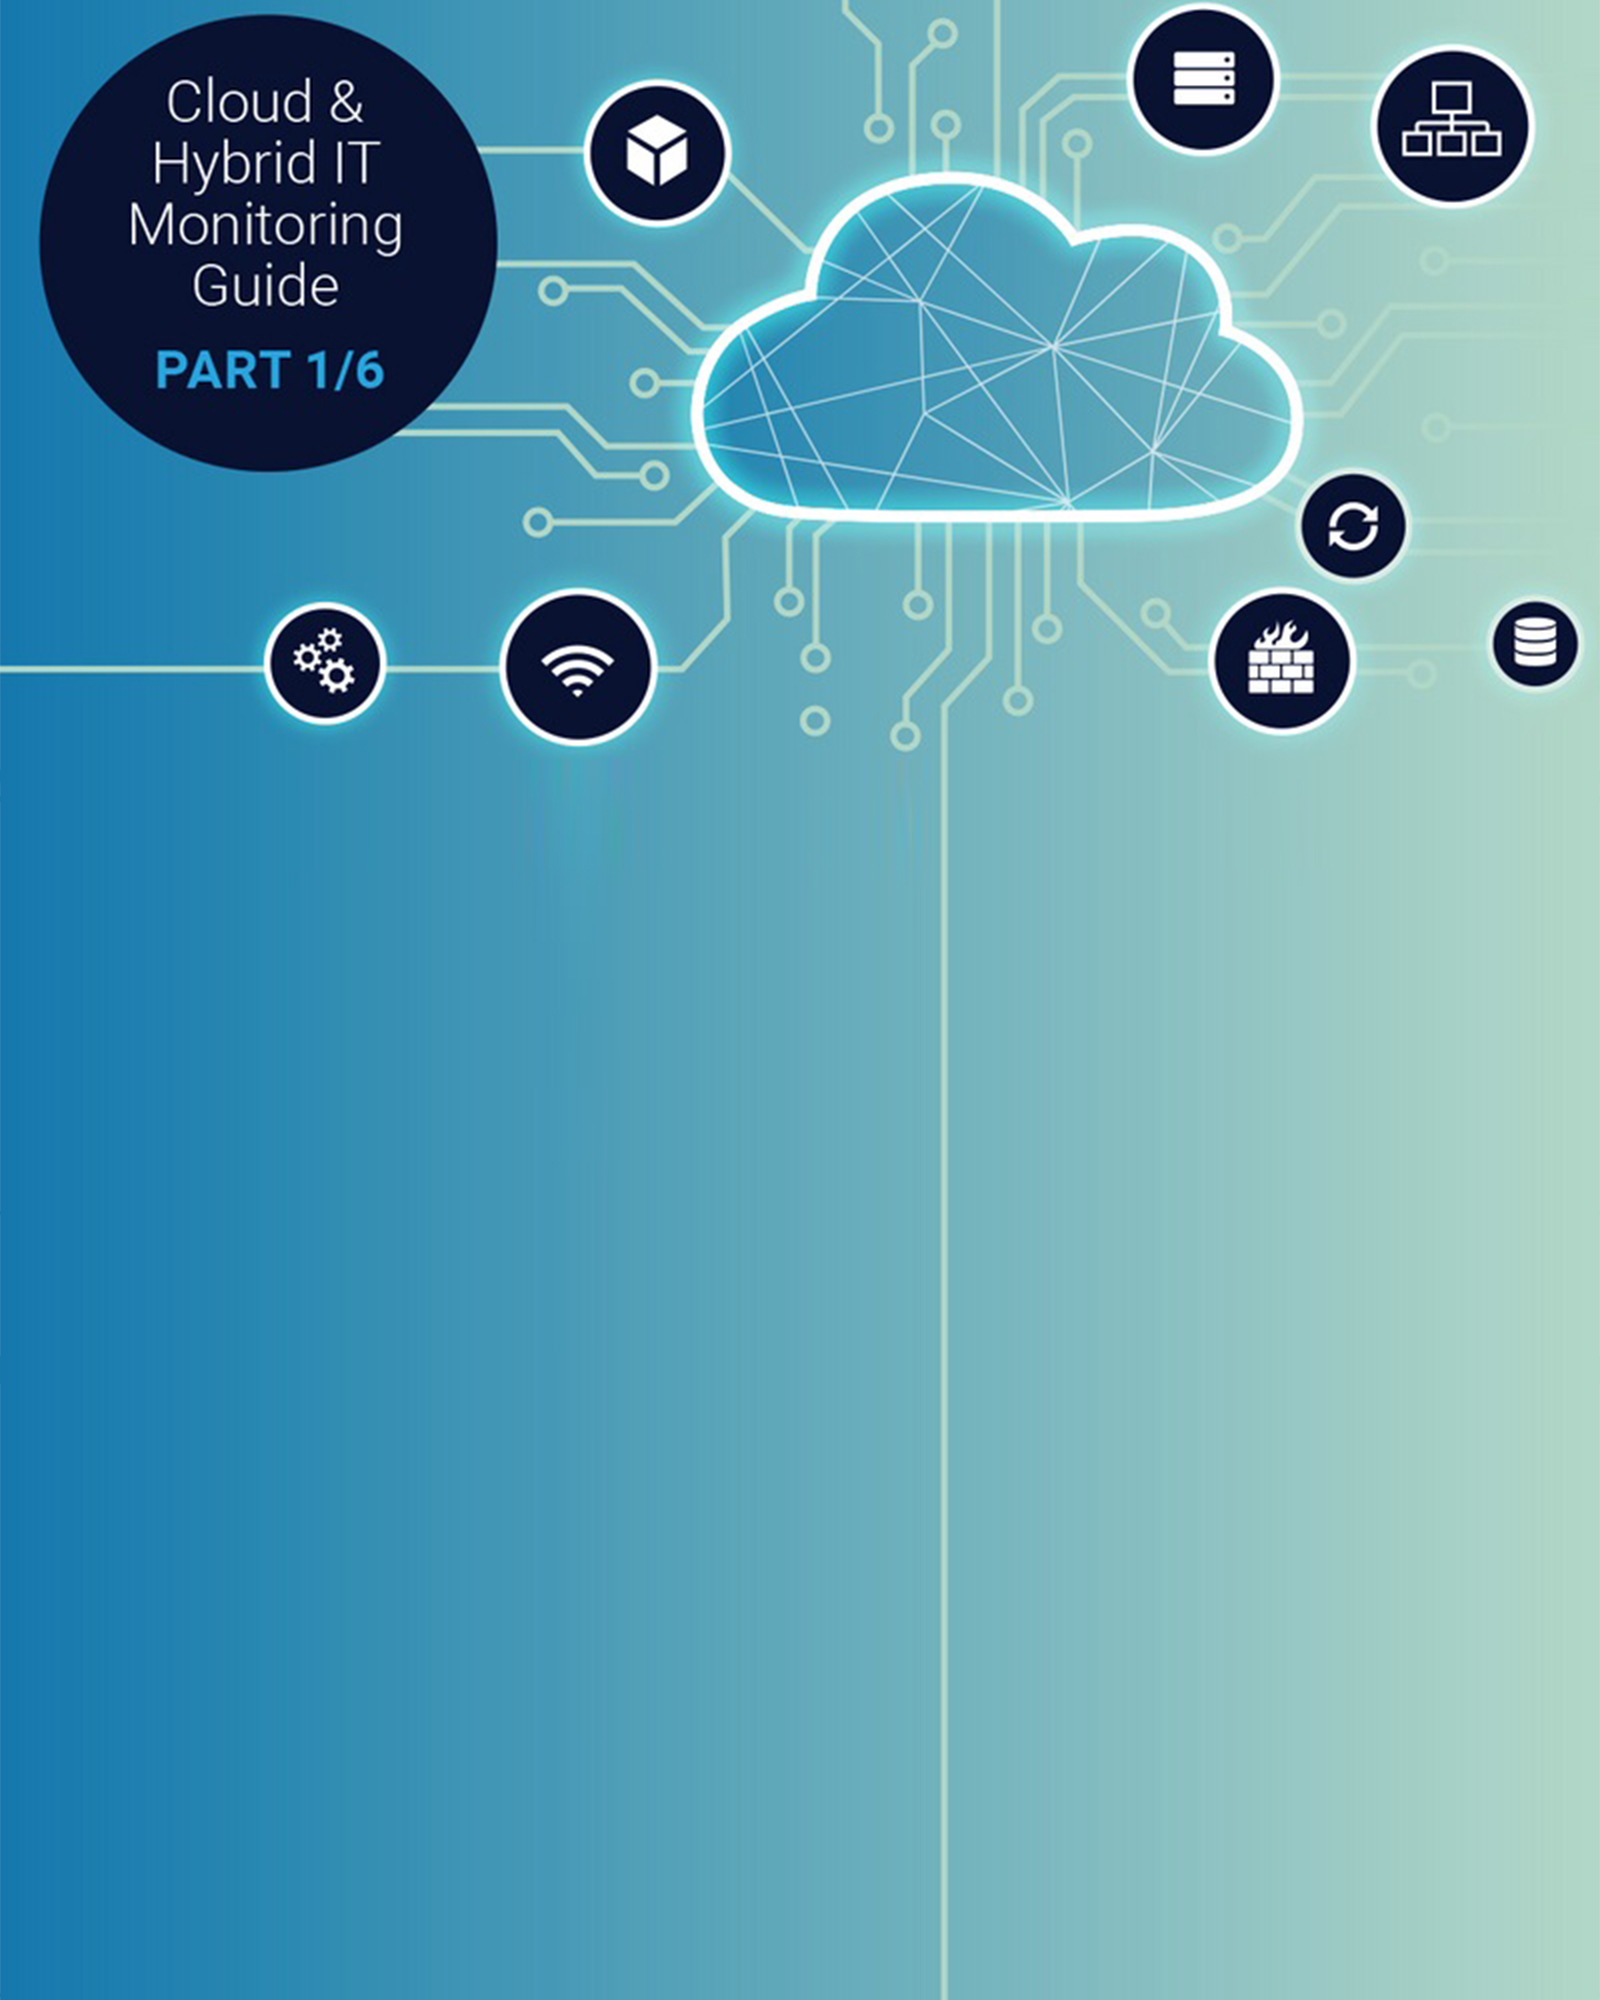 The ultimate guide to monitoring your cloud and hybrid IT infrastructure 1/6